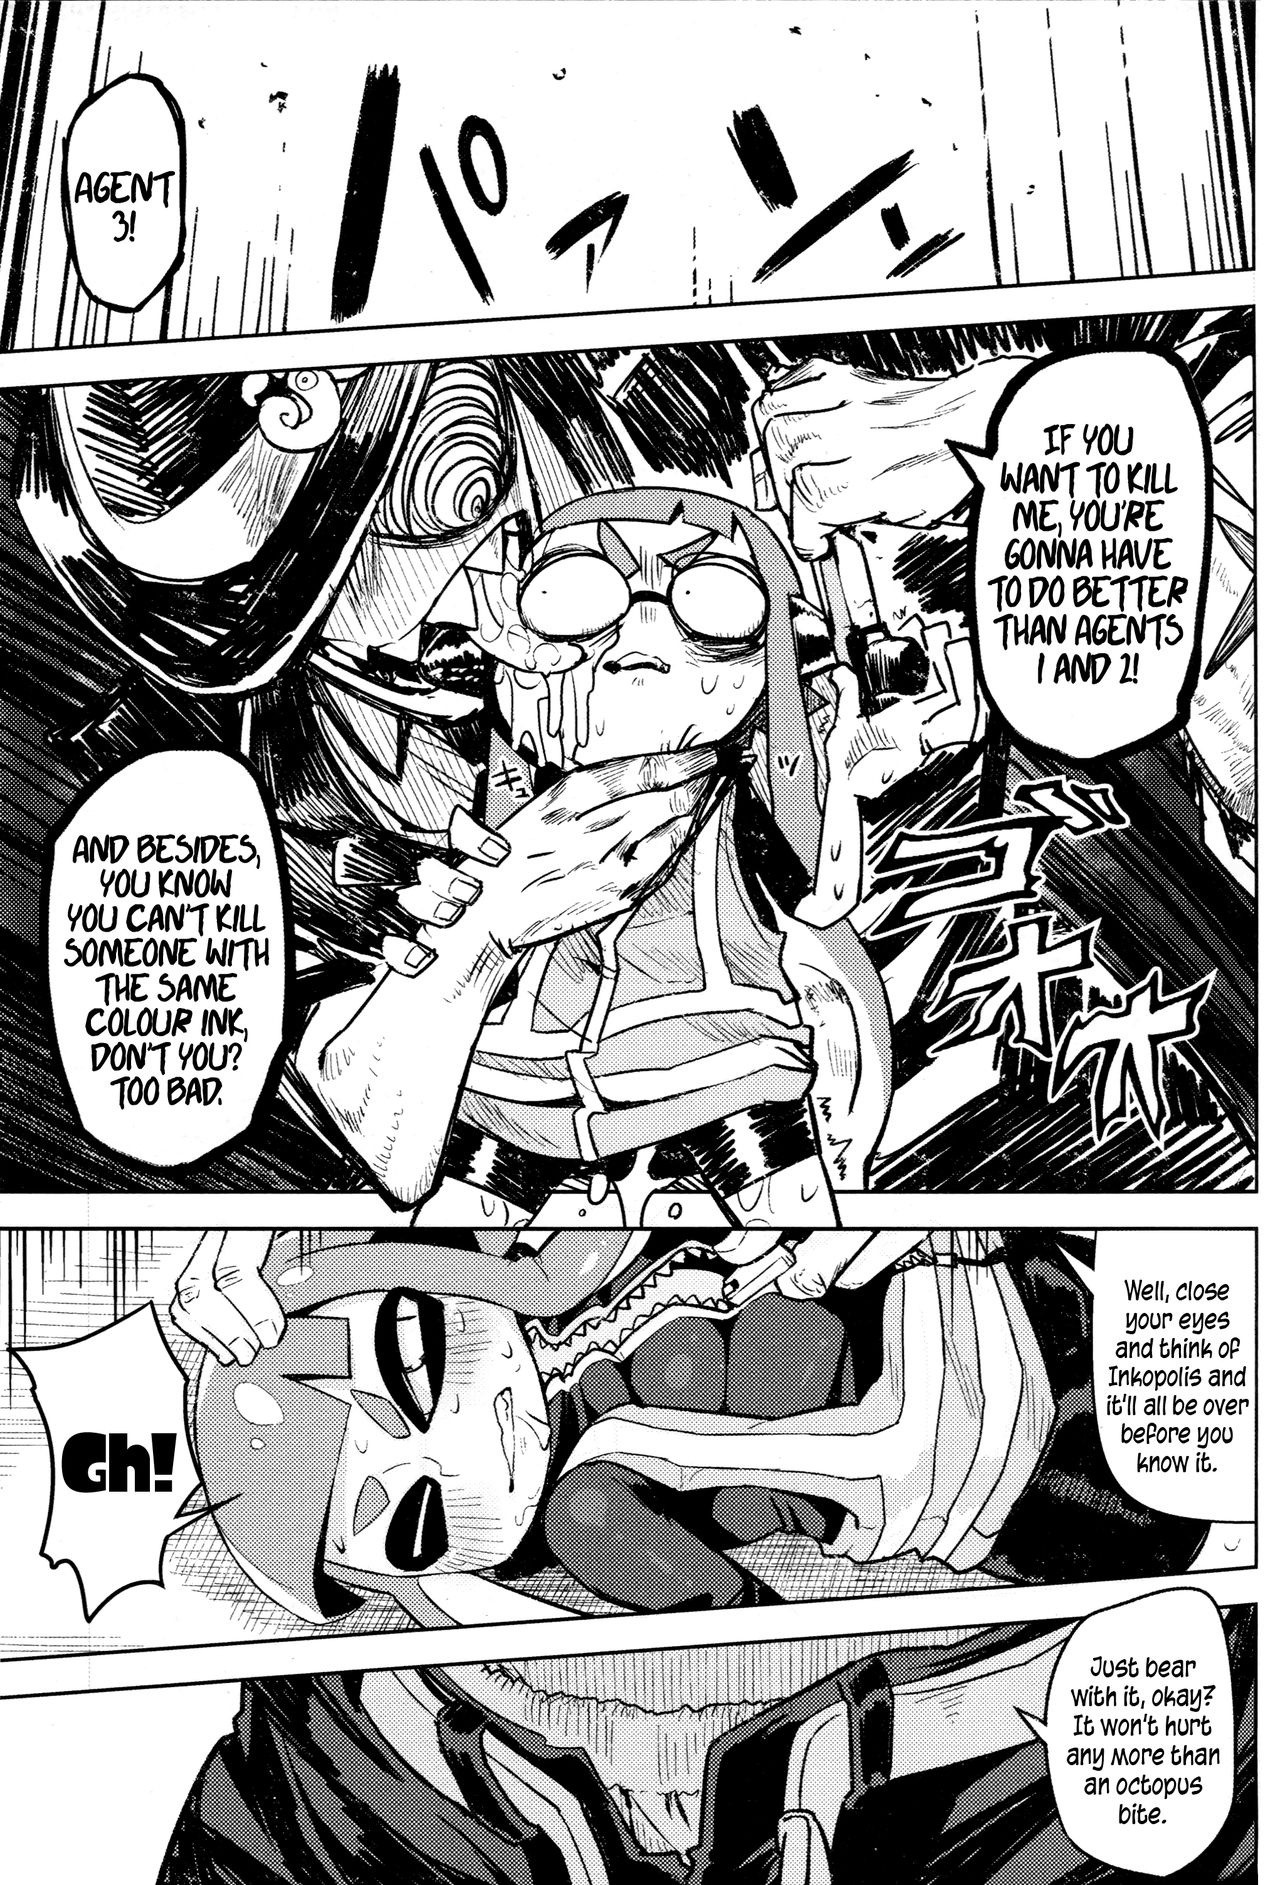 Hero by a Hair's Breadth hentai manga picture 9